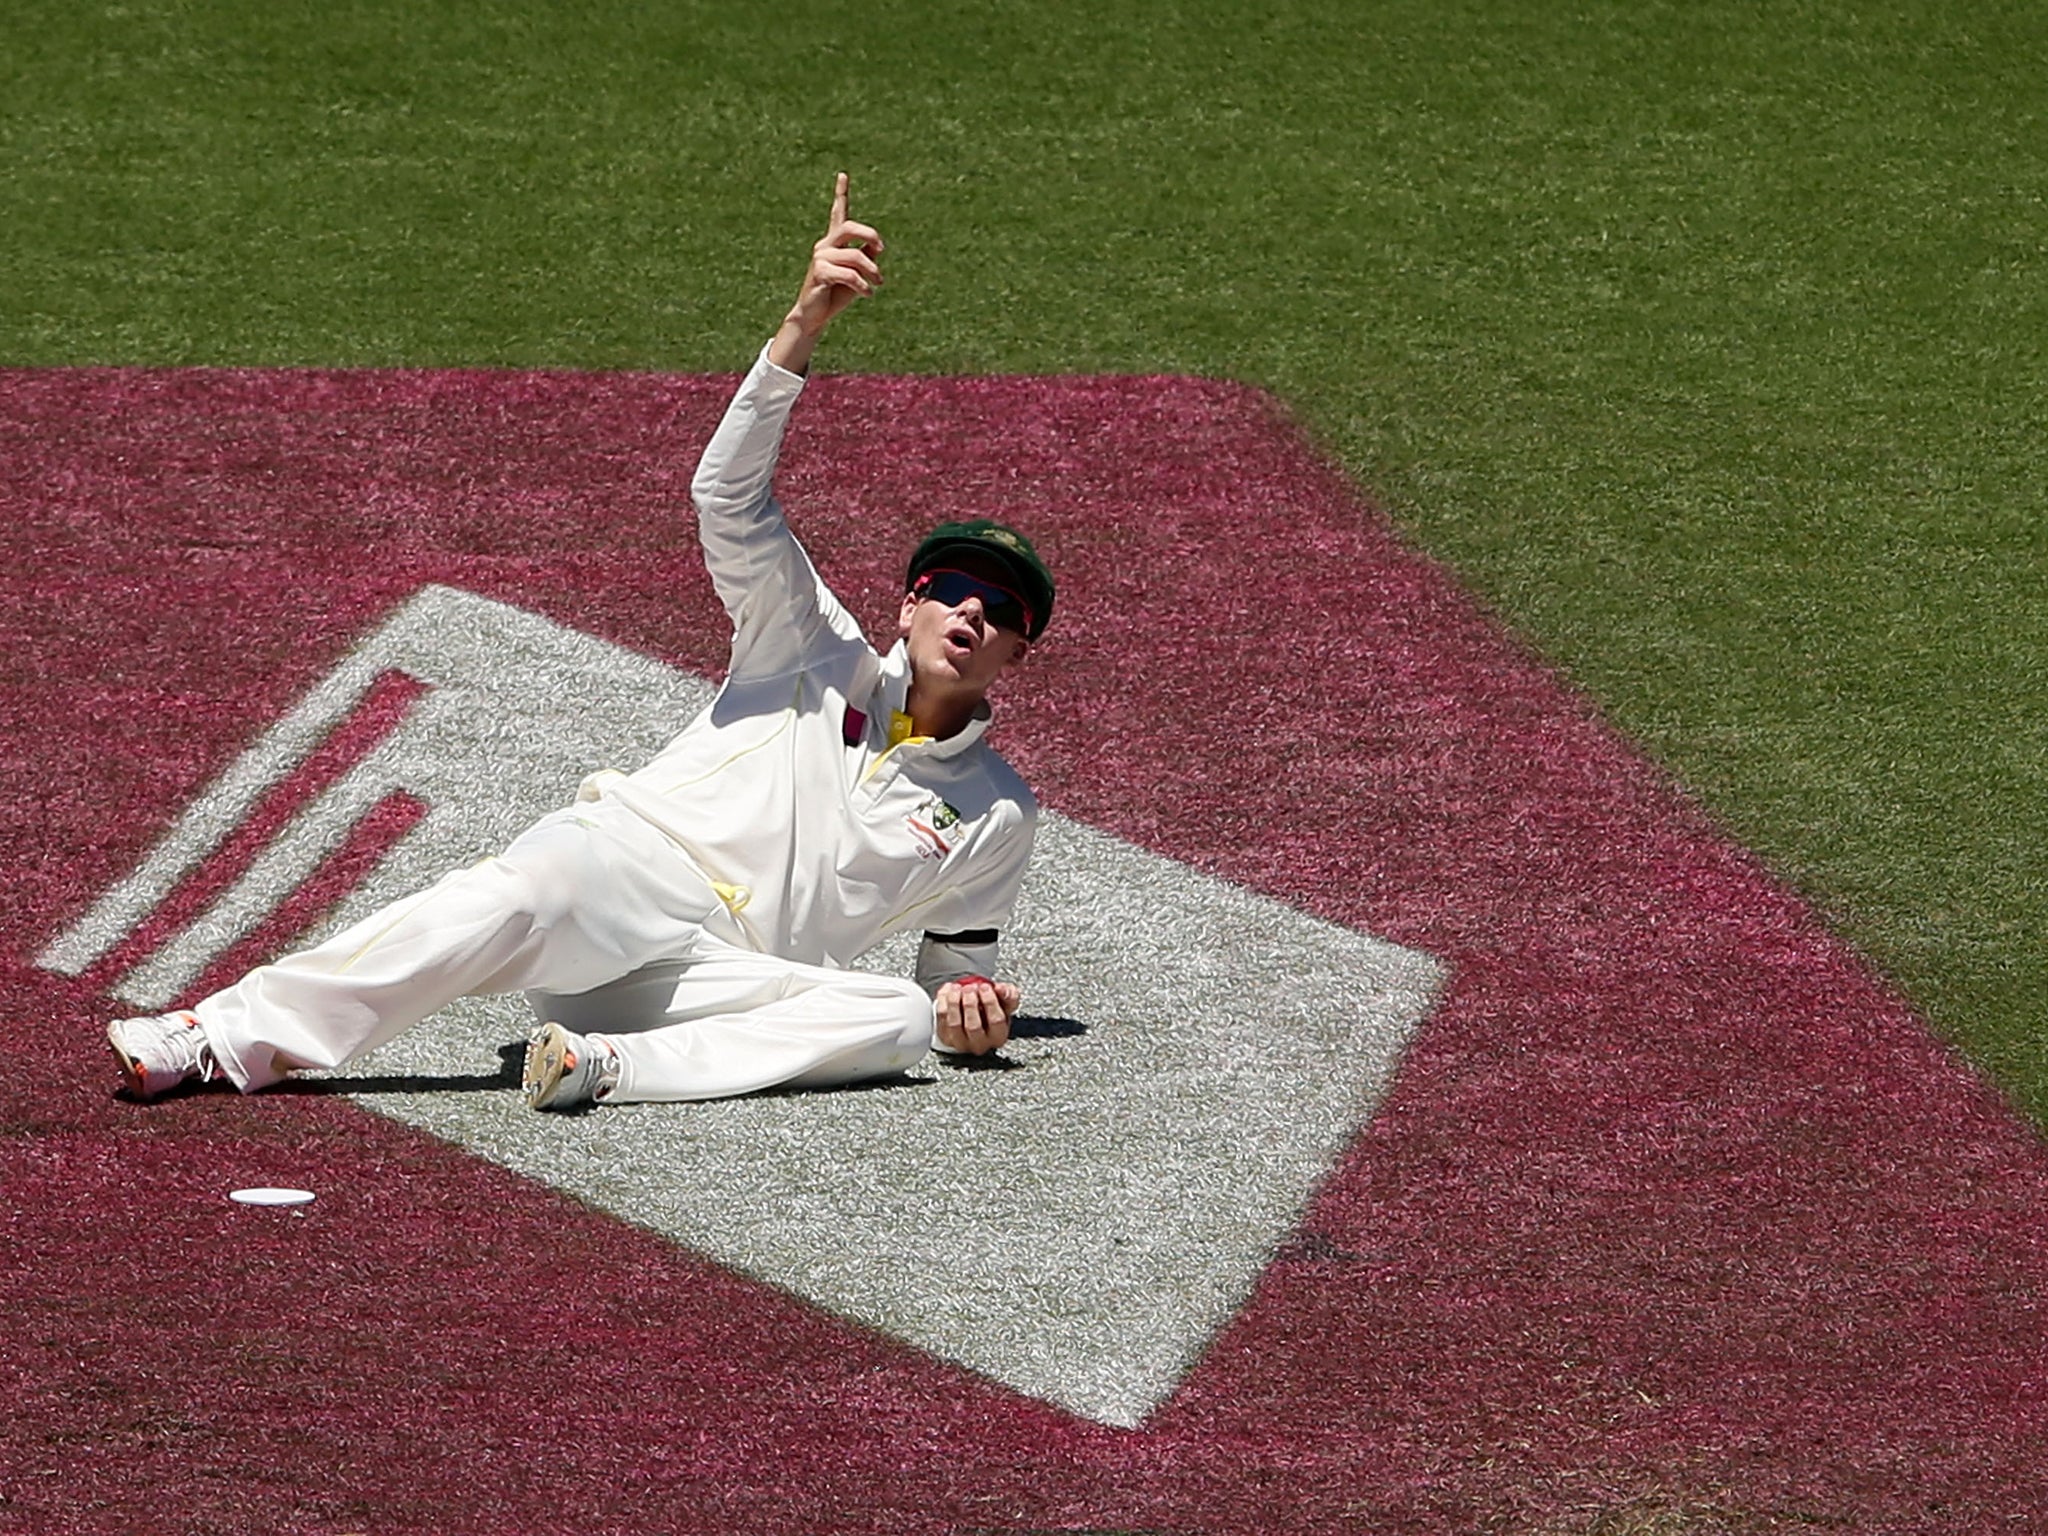 Steve Smith points to the Spidercam after dropping a catch